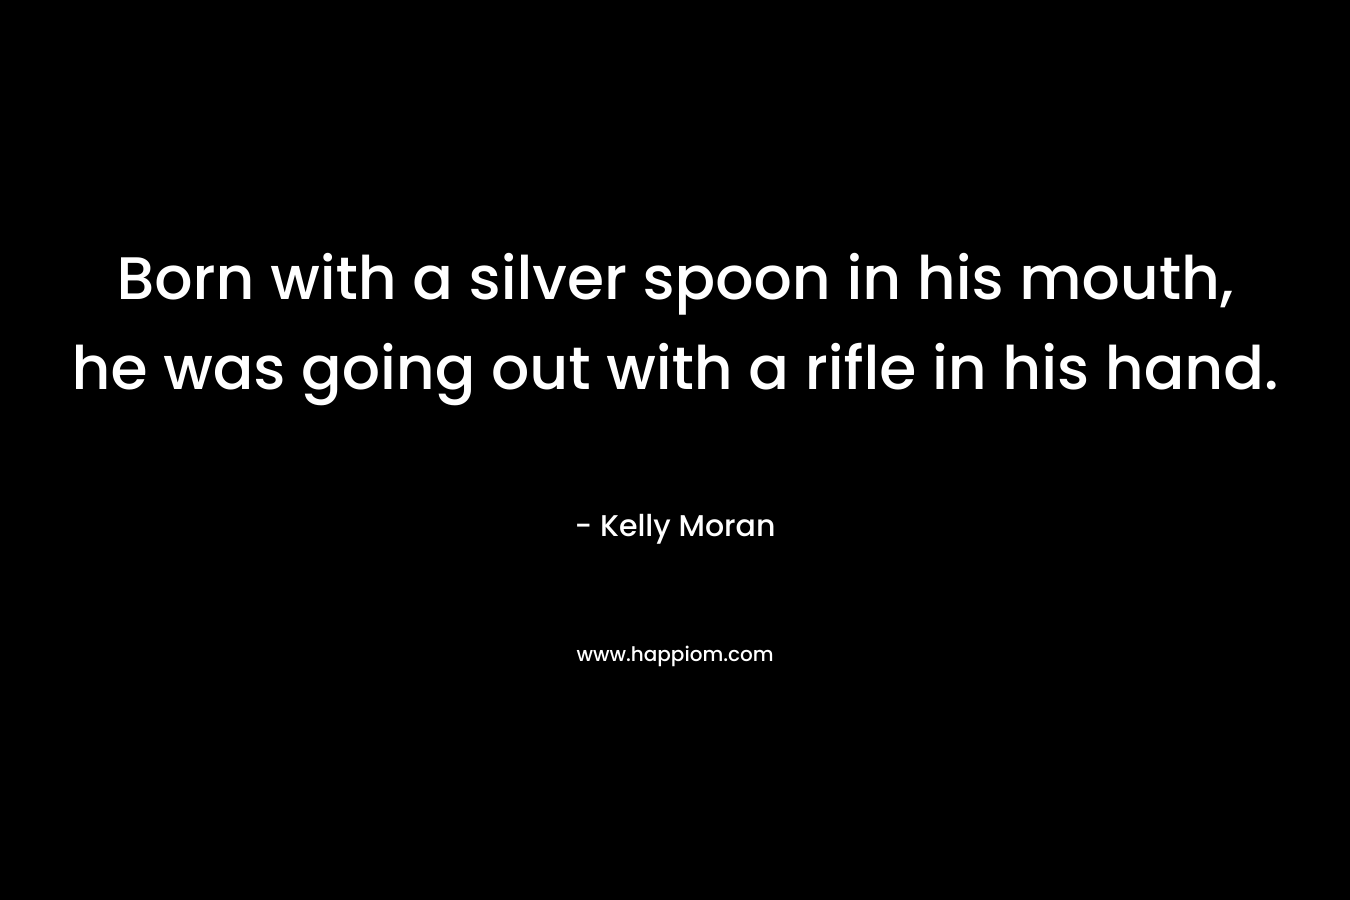 Born with a silver spoon in his mouth, he was going out with a rifle in his hand. – Kelly Moran